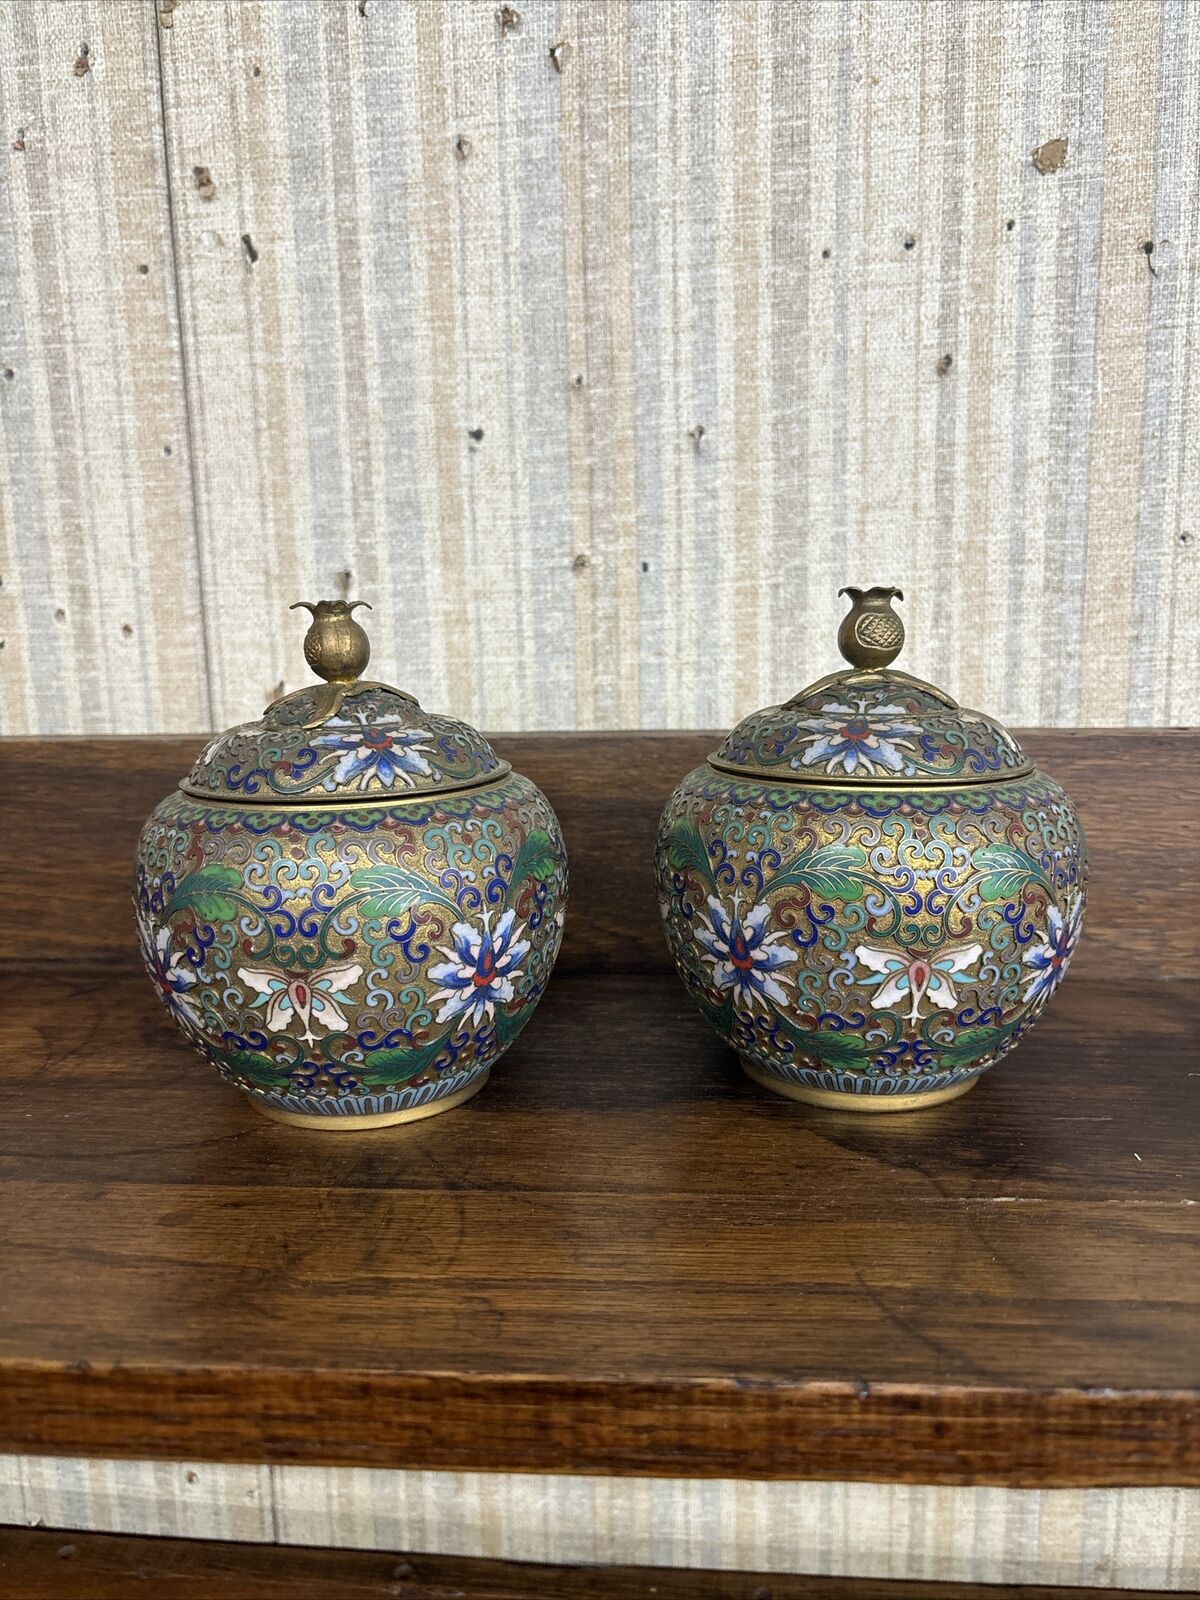 Fine Pair of Japanese Champleve Covered Jars